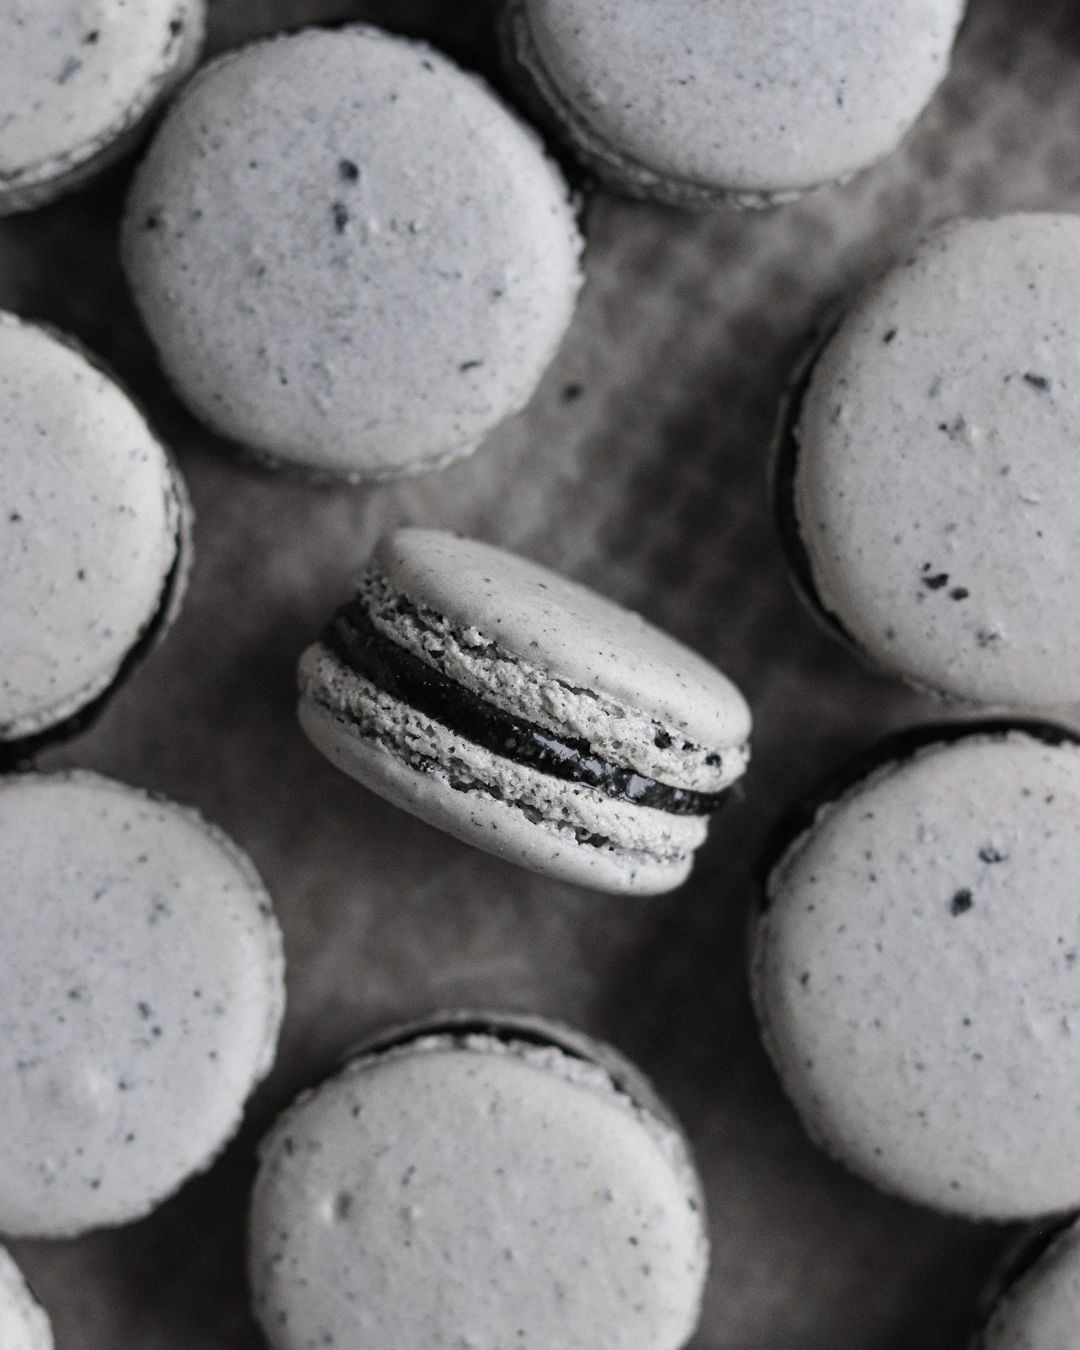 one black sesame macaron sits on its side facing up at the camera to show its black sesame honey filling